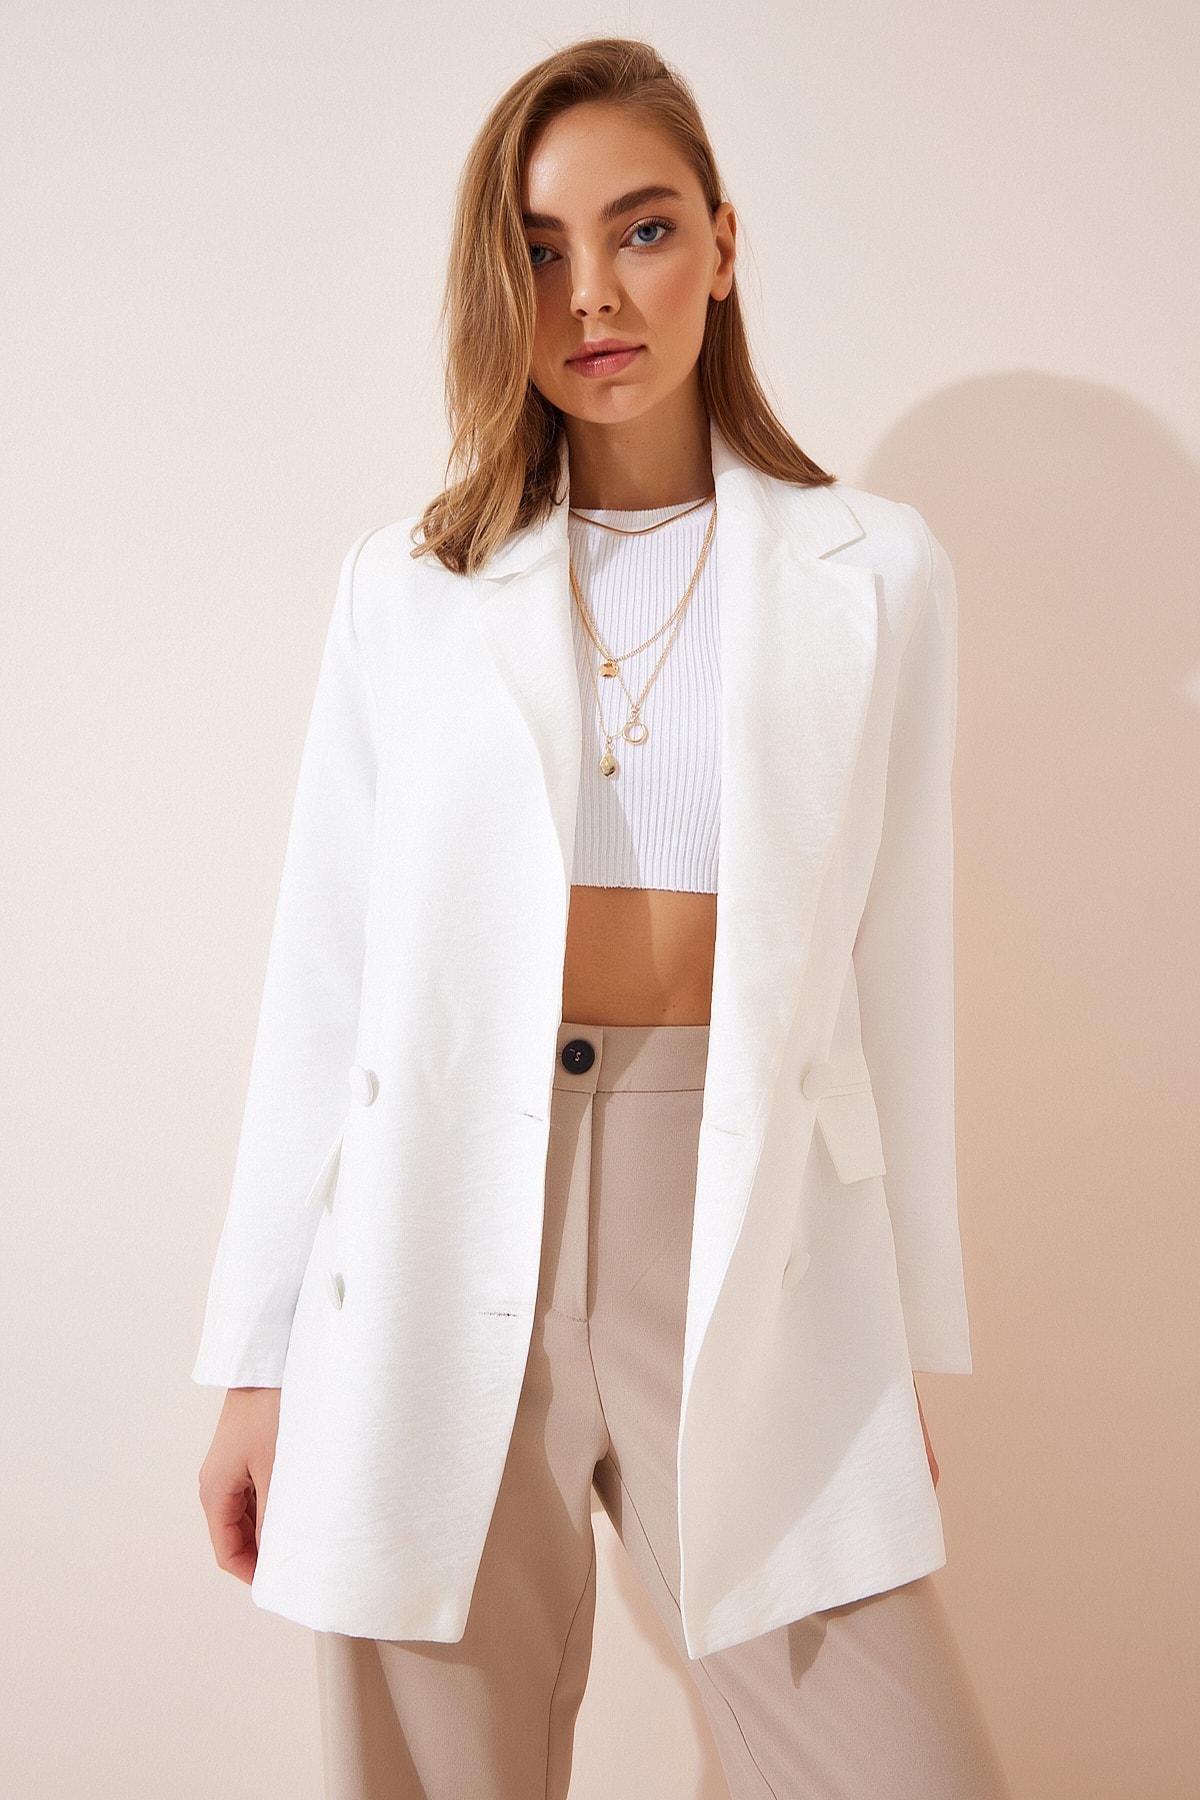 Happiness - White Double-Breasted Oversize Blazer